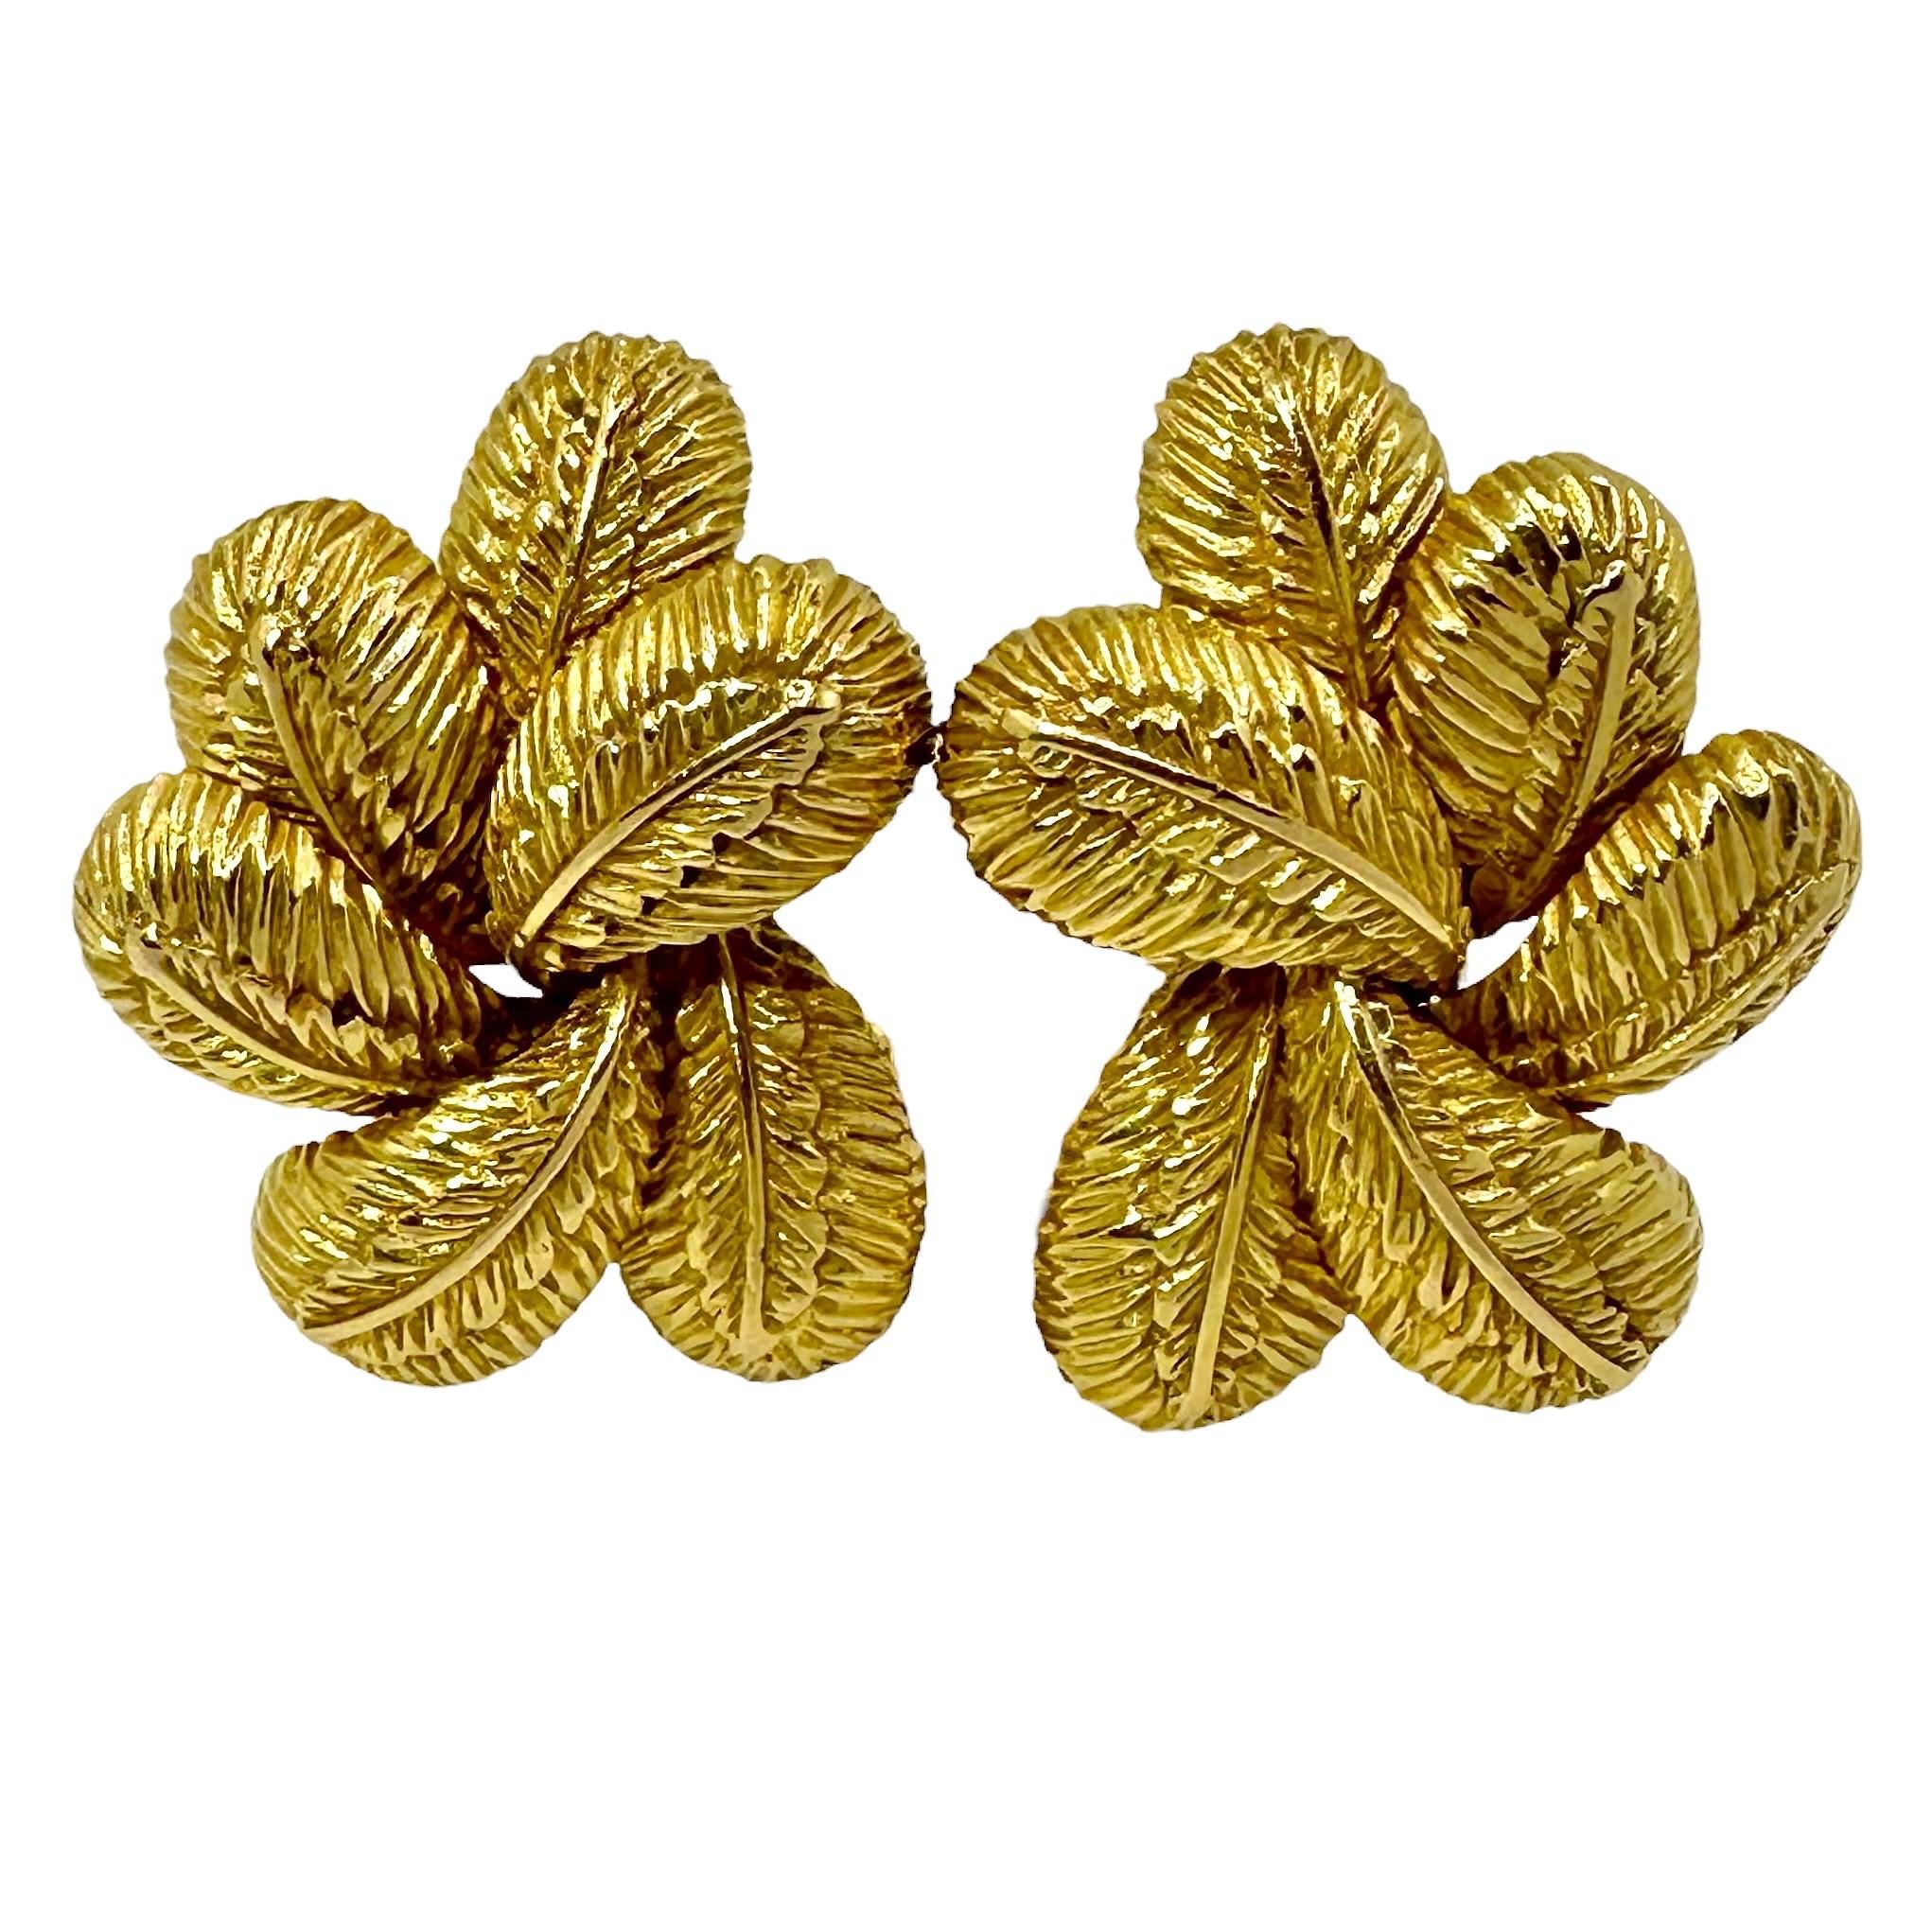 This characteristically Italian pair of richly burnished 18K yellow gold clip on earrings create a gentle sense of motion. Every surface is deeply textured. The tailored style makes them ideal for every day use.  Measures 1 1/8 inches long by just